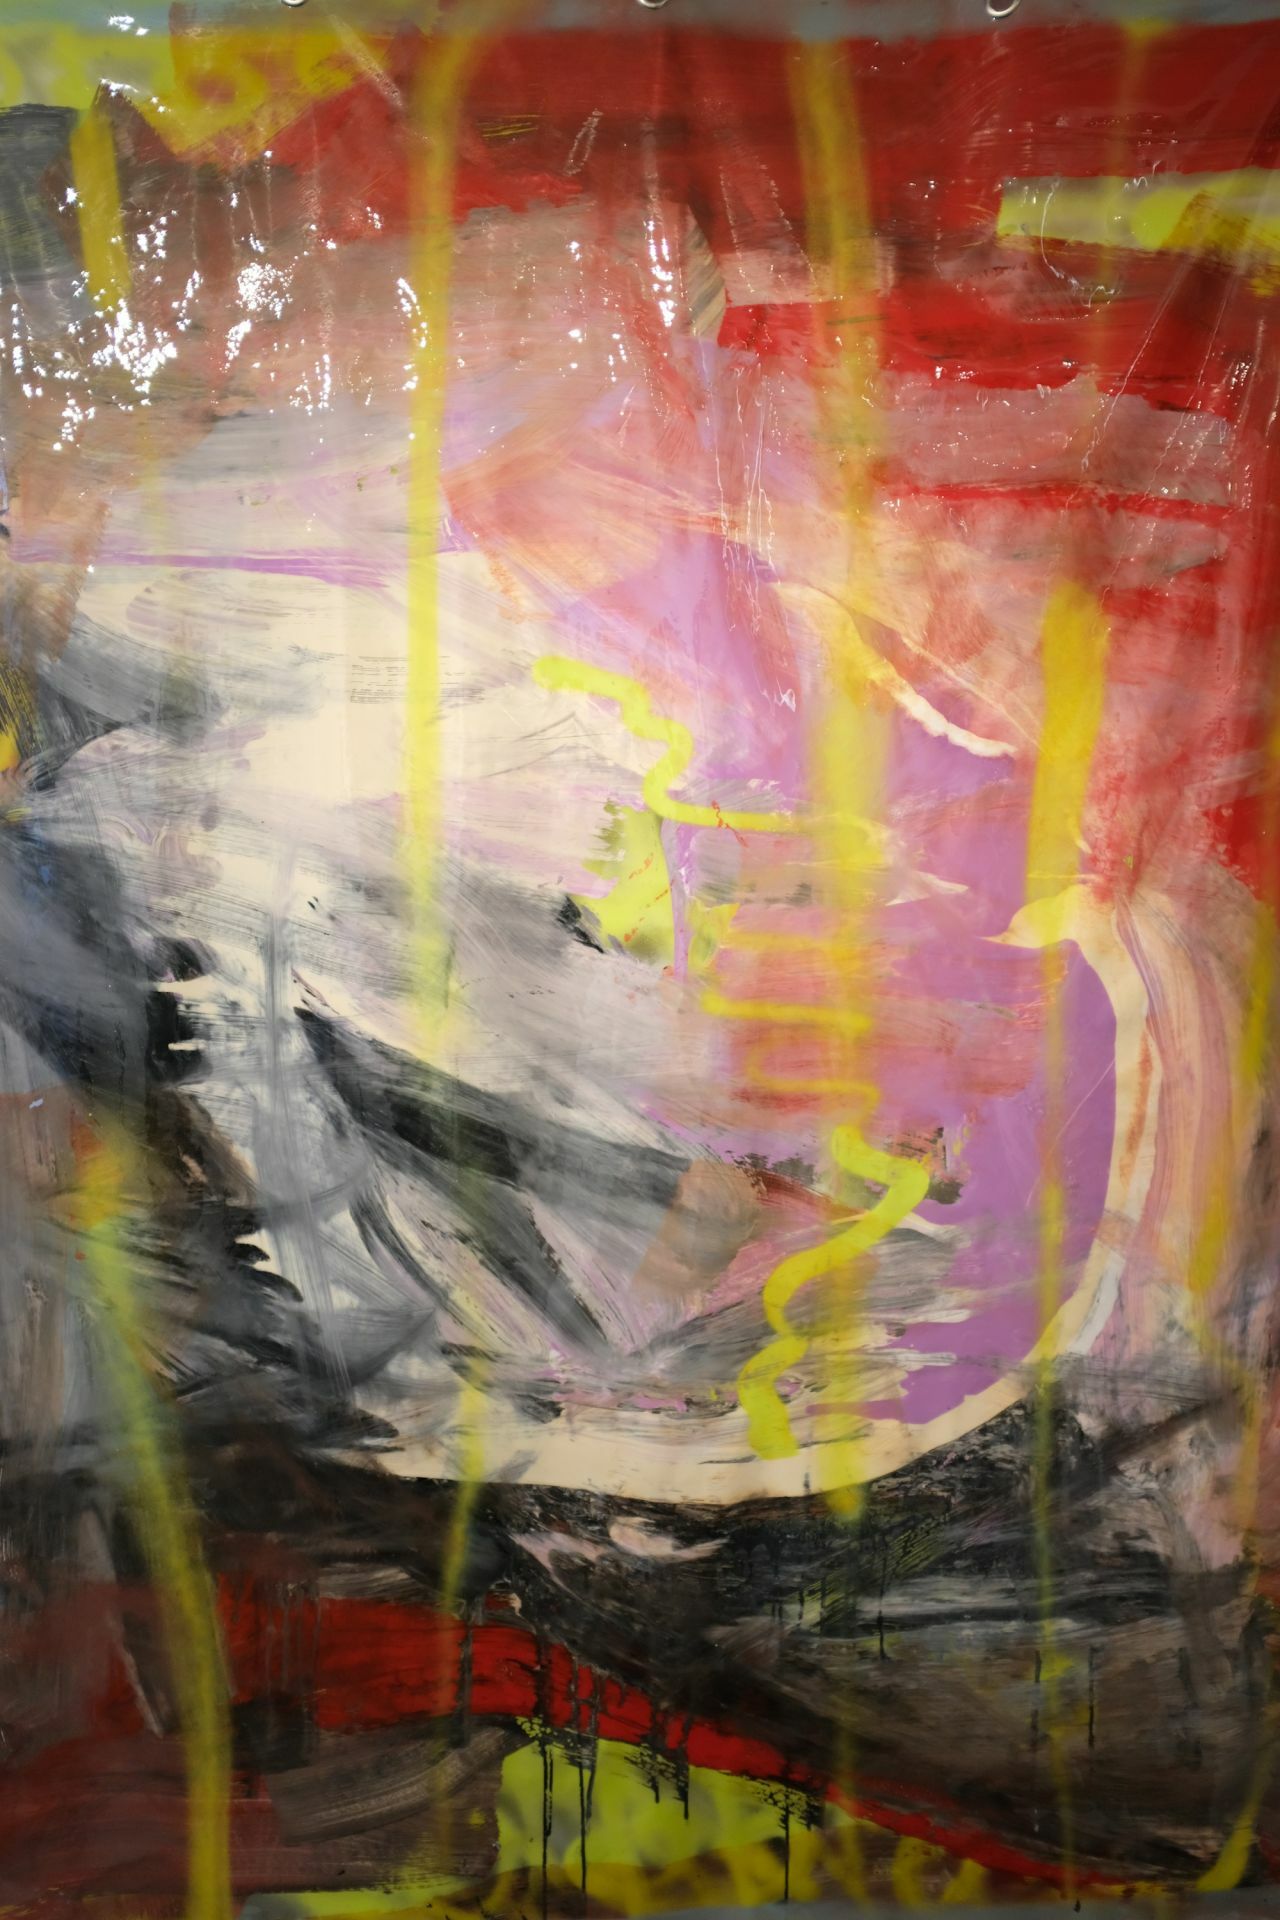 Untitled (NY), 160 x 120 cm, ink, lacquer and spray paint on PVC, 2018